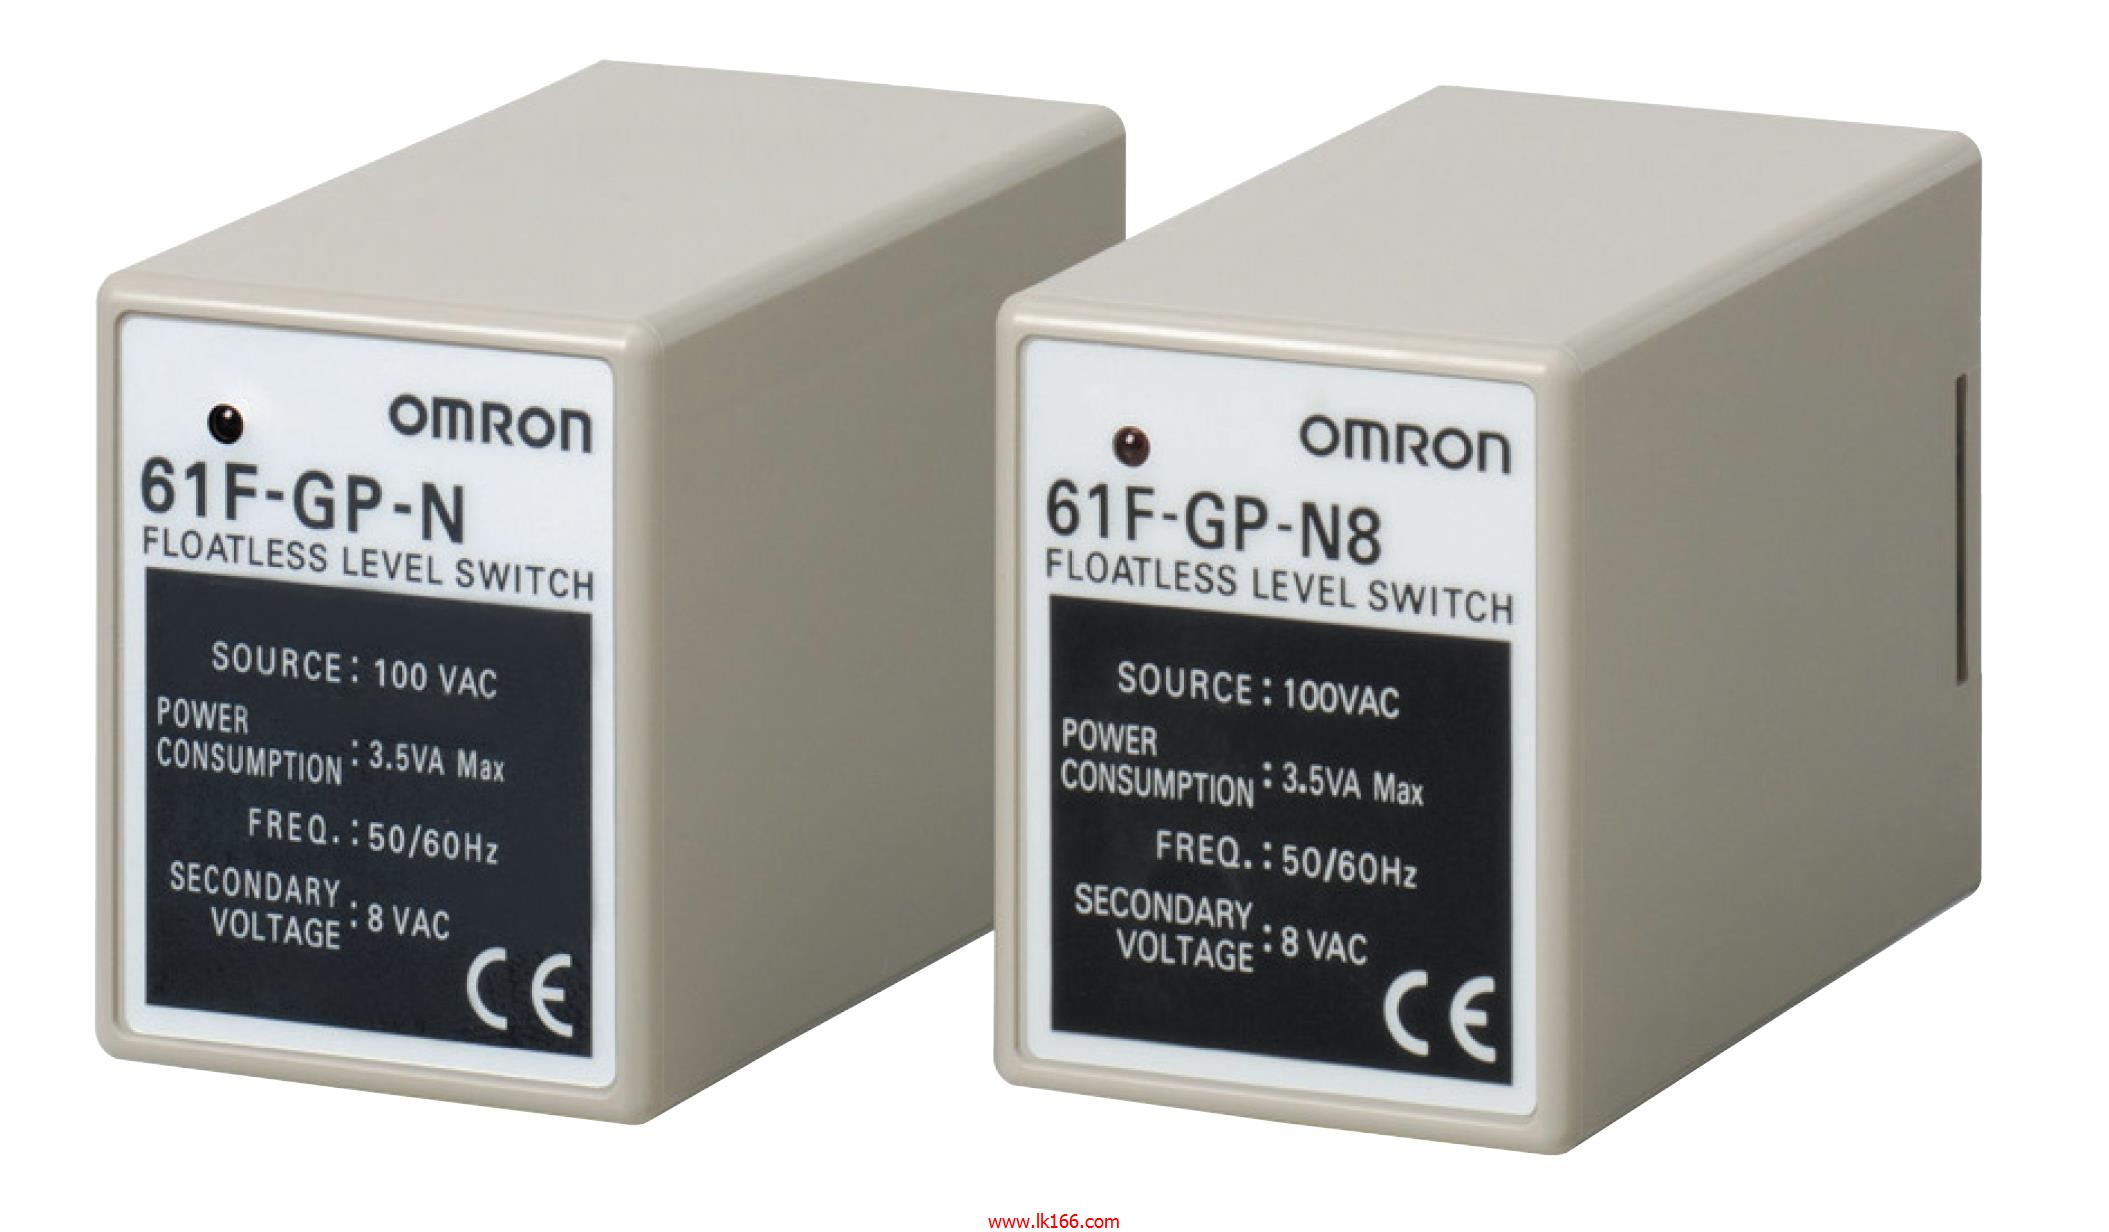 OMRON Floatless Level Switch (Compact, Plug-in Type) 61F-GP-NR